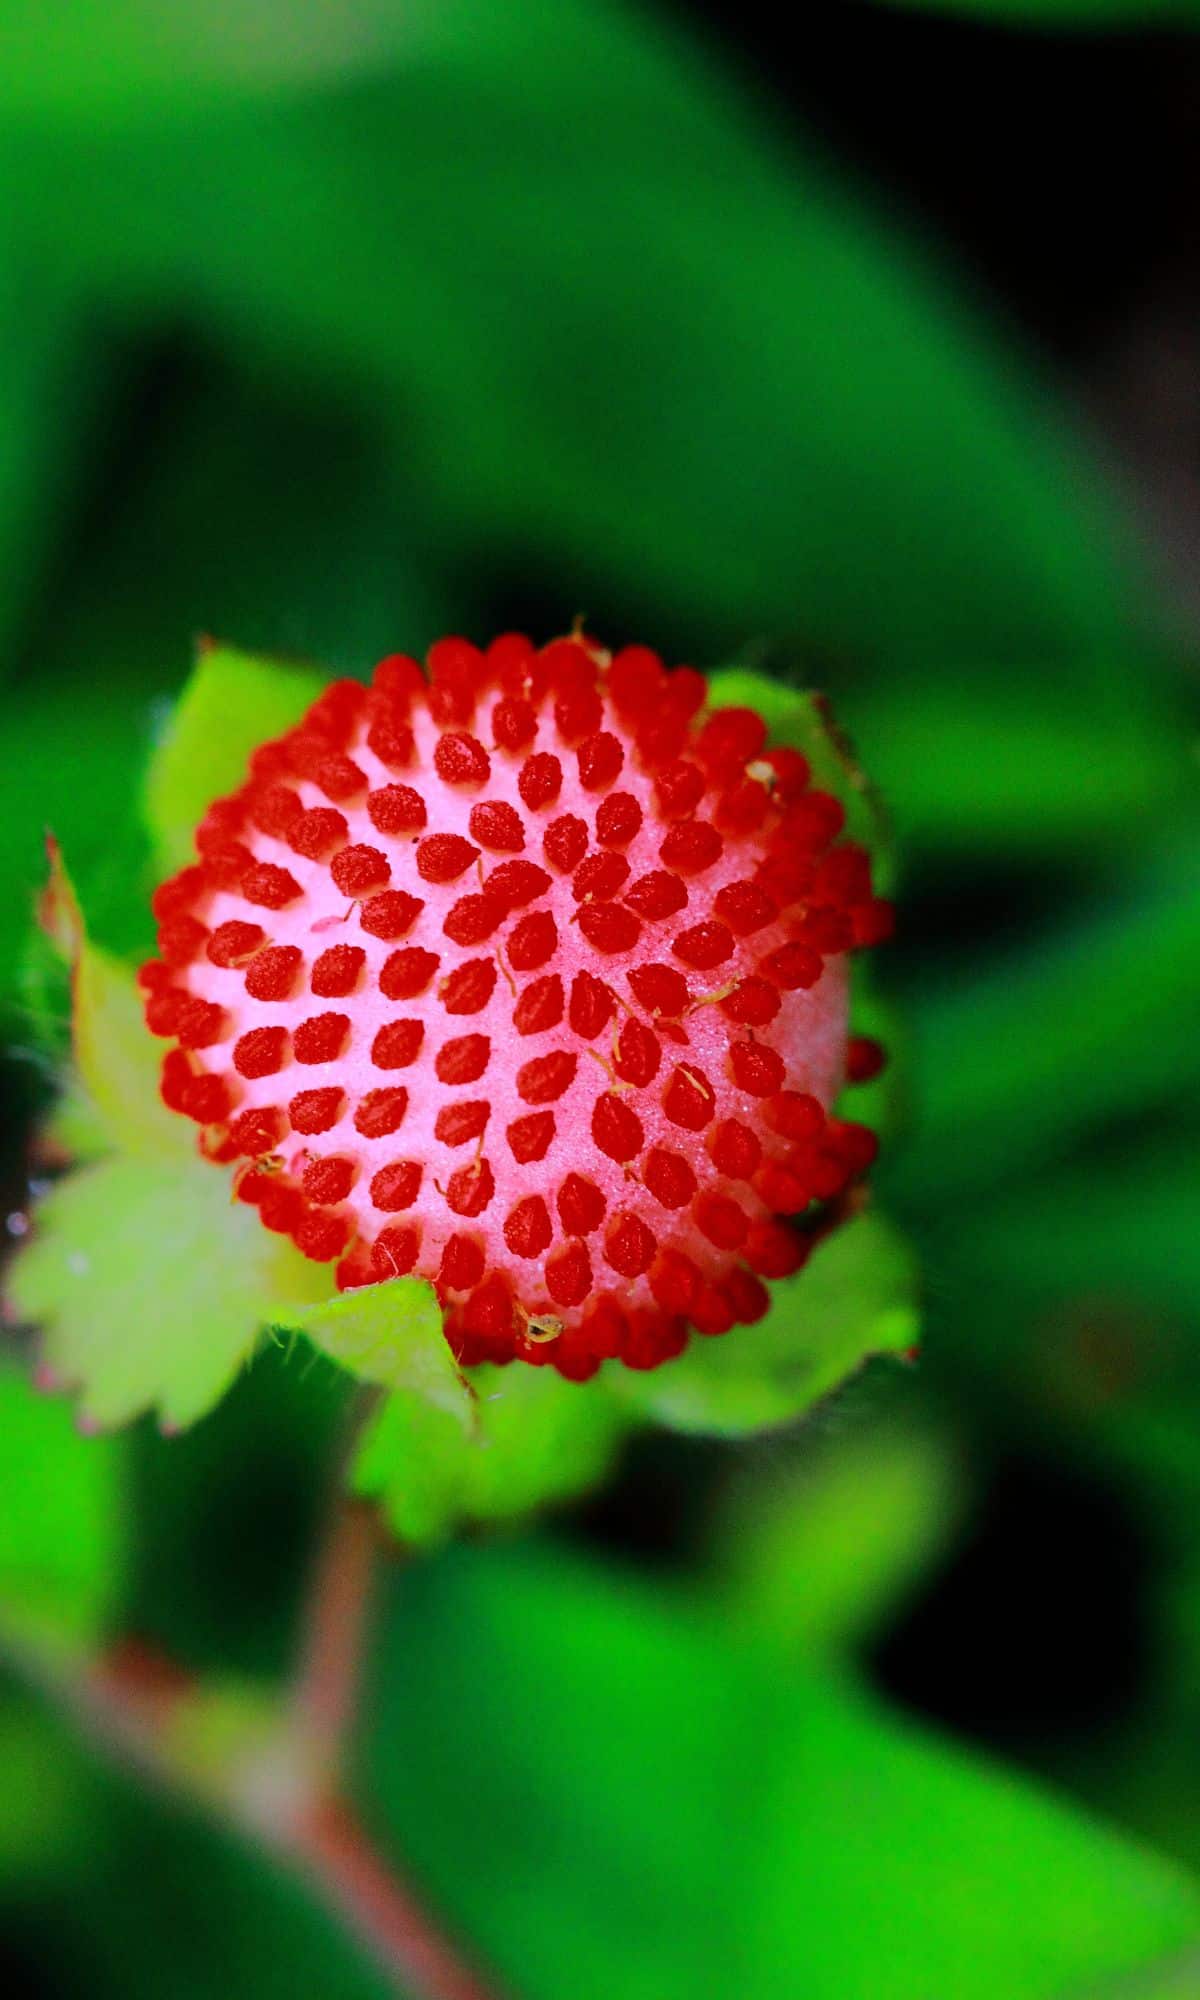 One red indian strawberry on a plant.